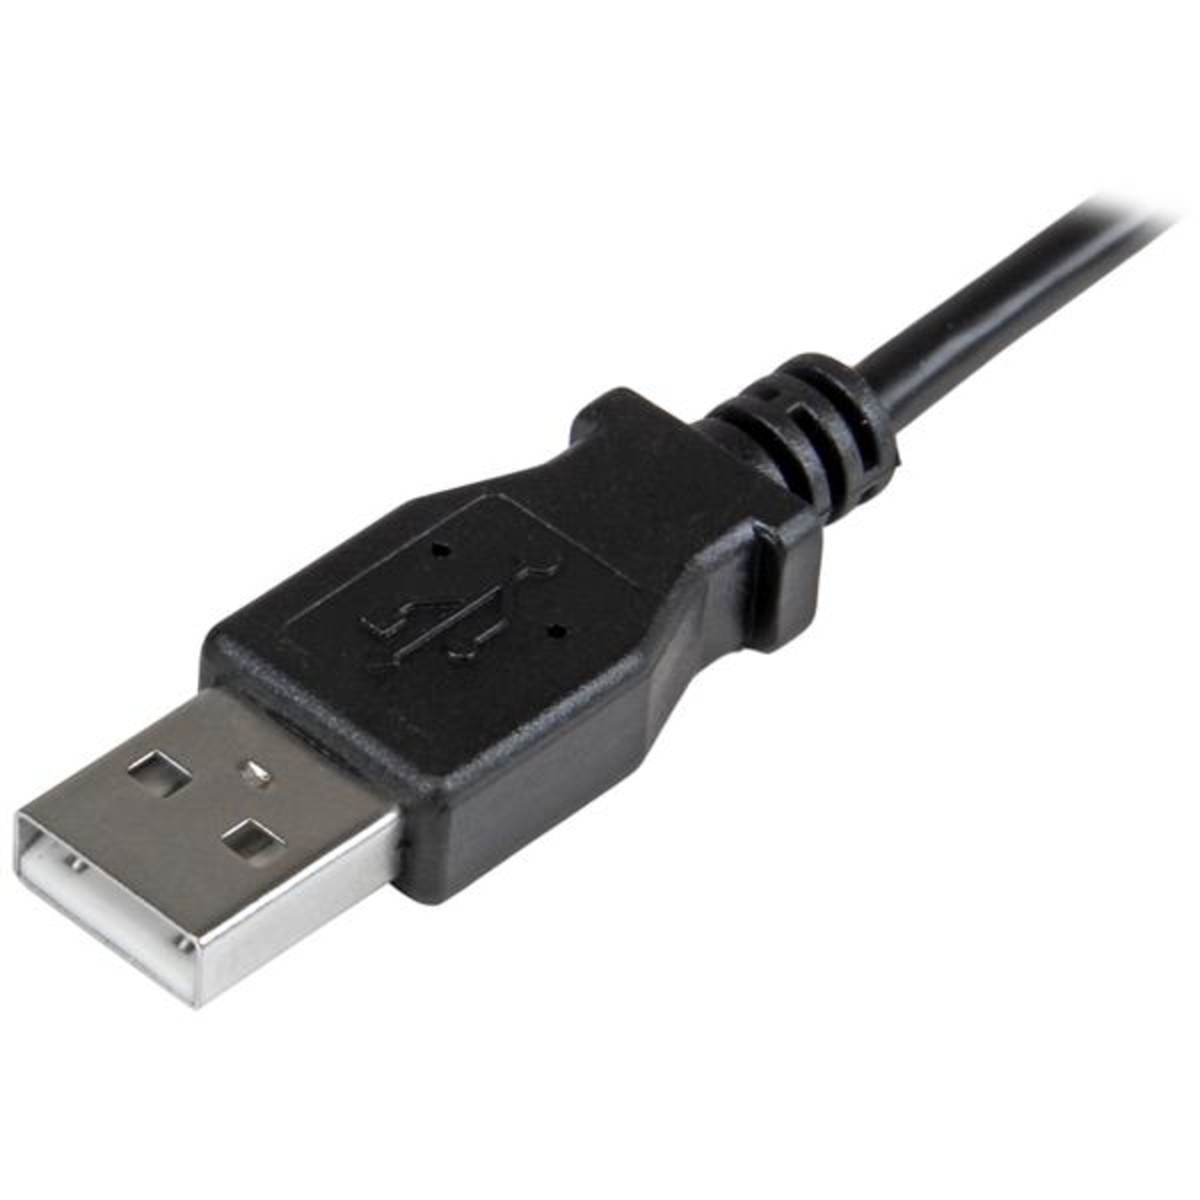 Micro-USB Charge-and-Sync Cable